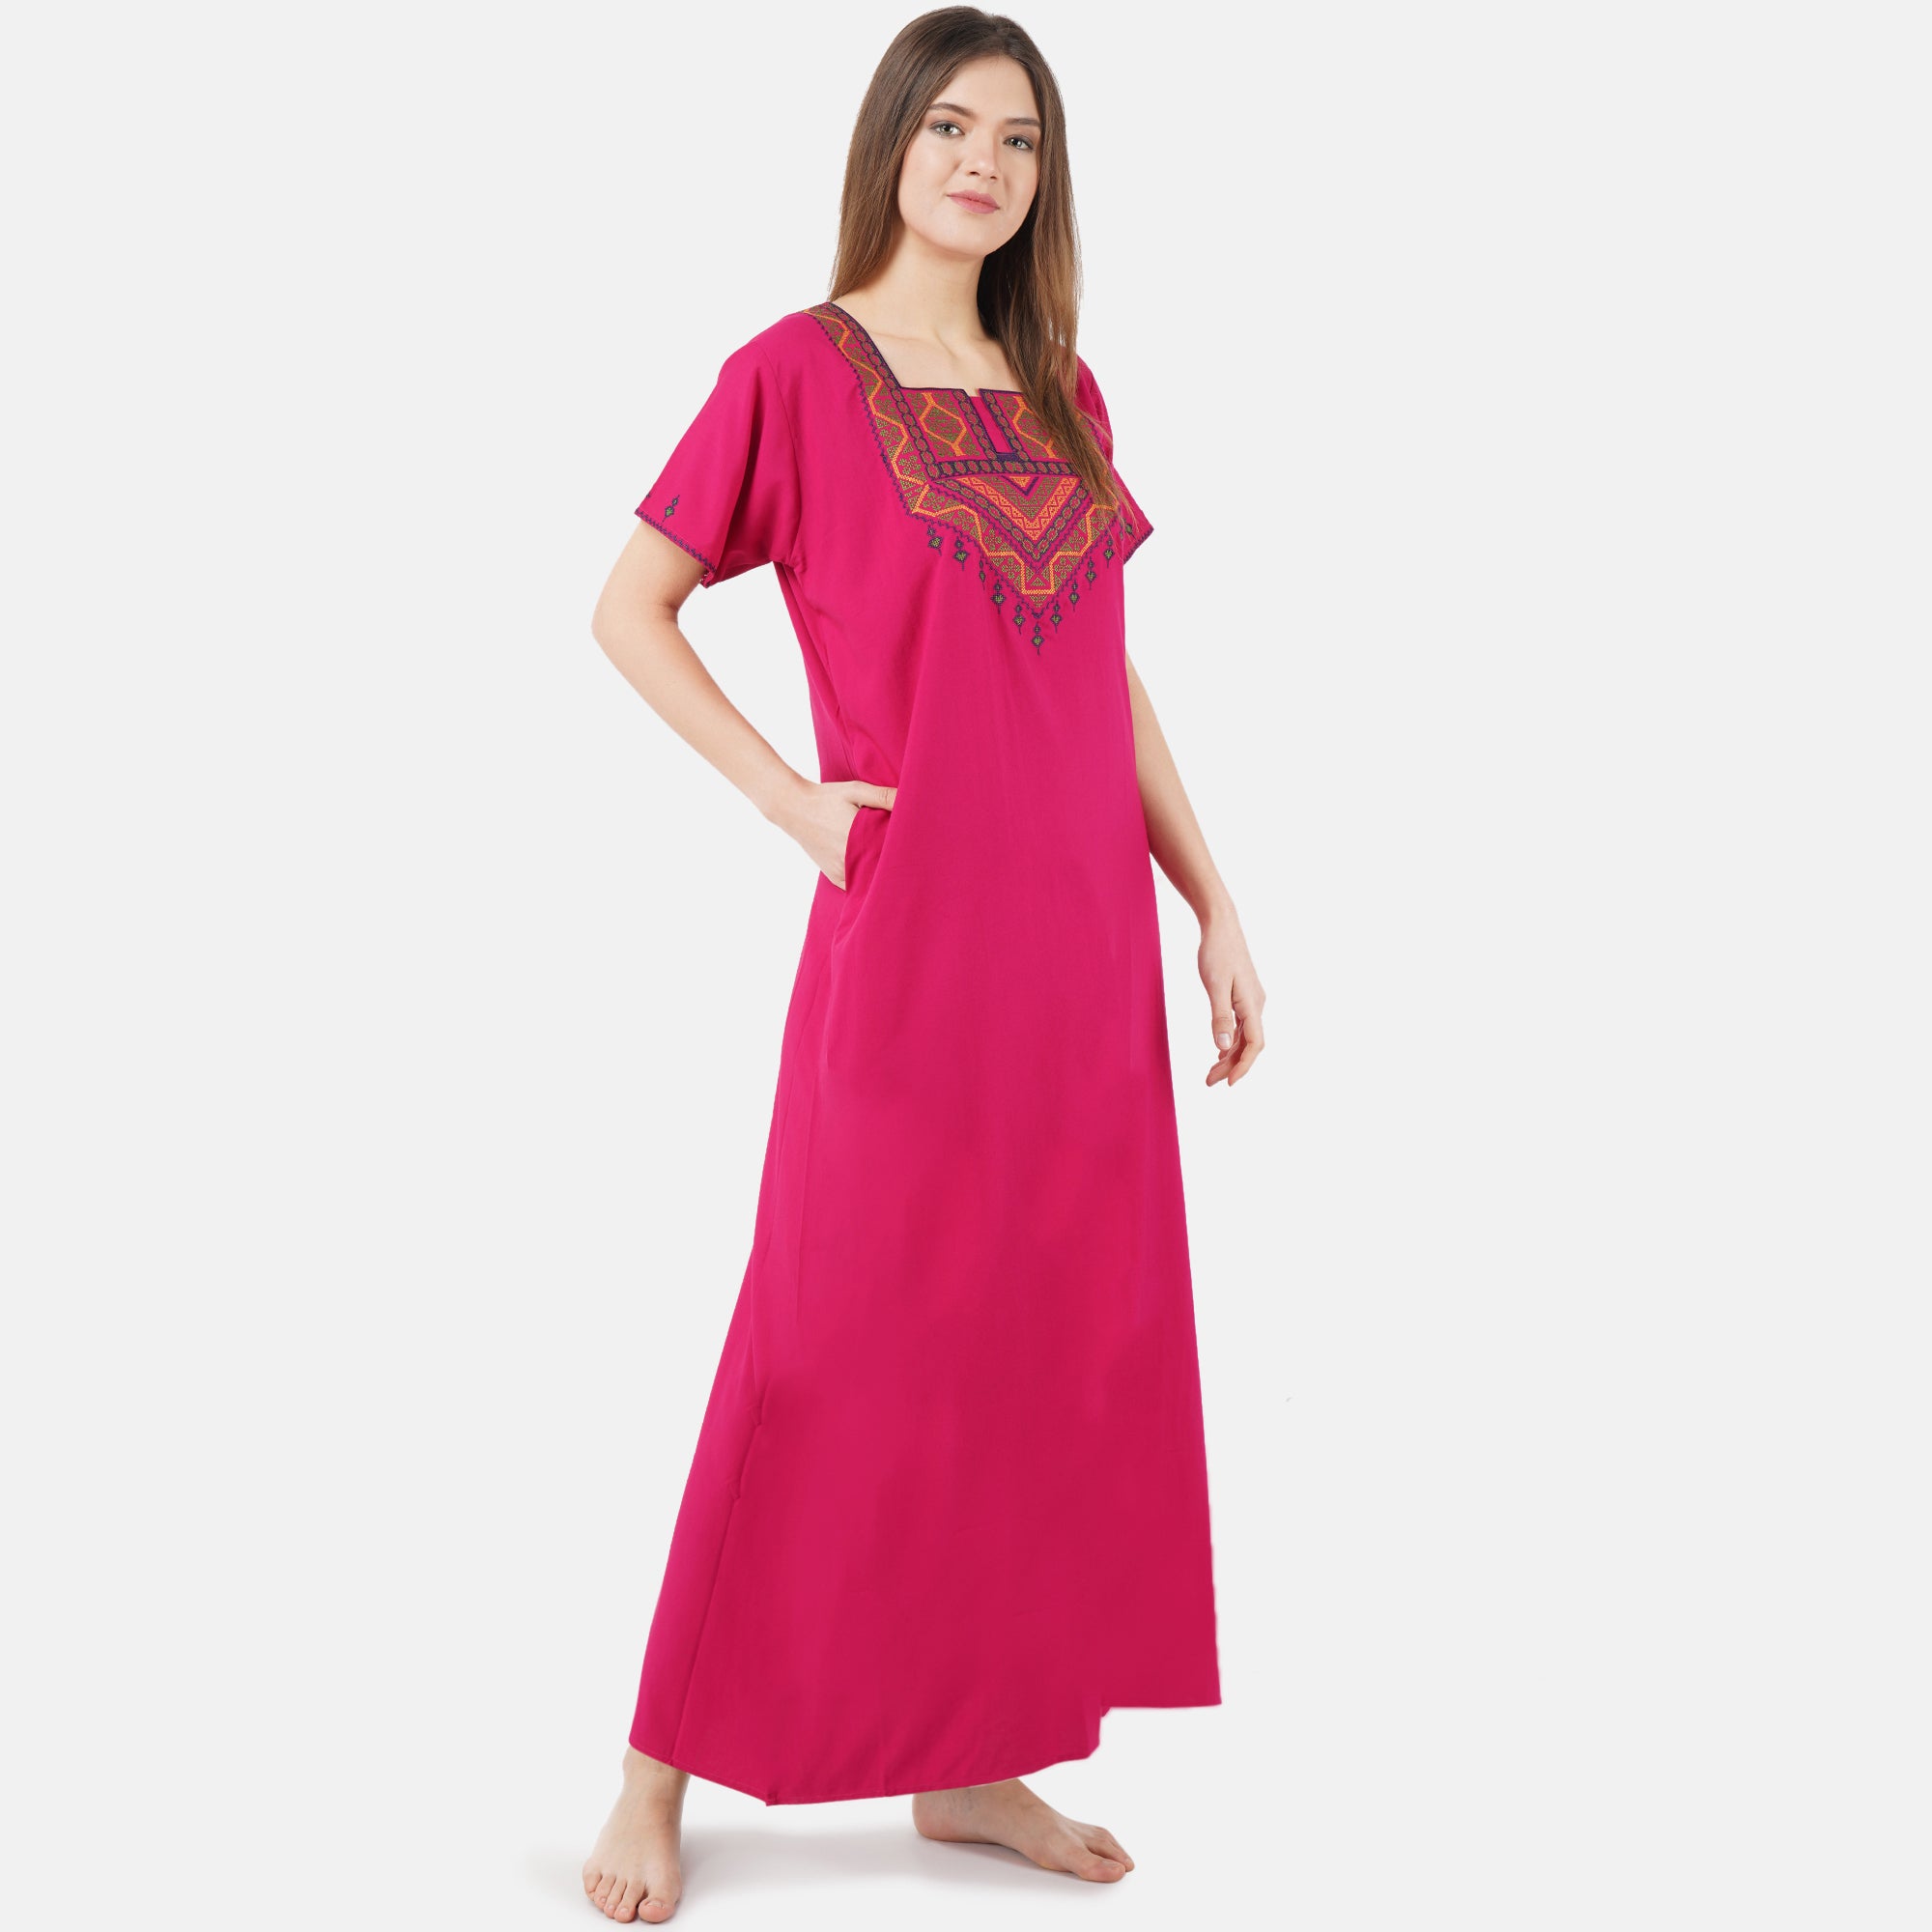 Nice n' Comfy Embroidered Cotton Nightgown (BL-G153)